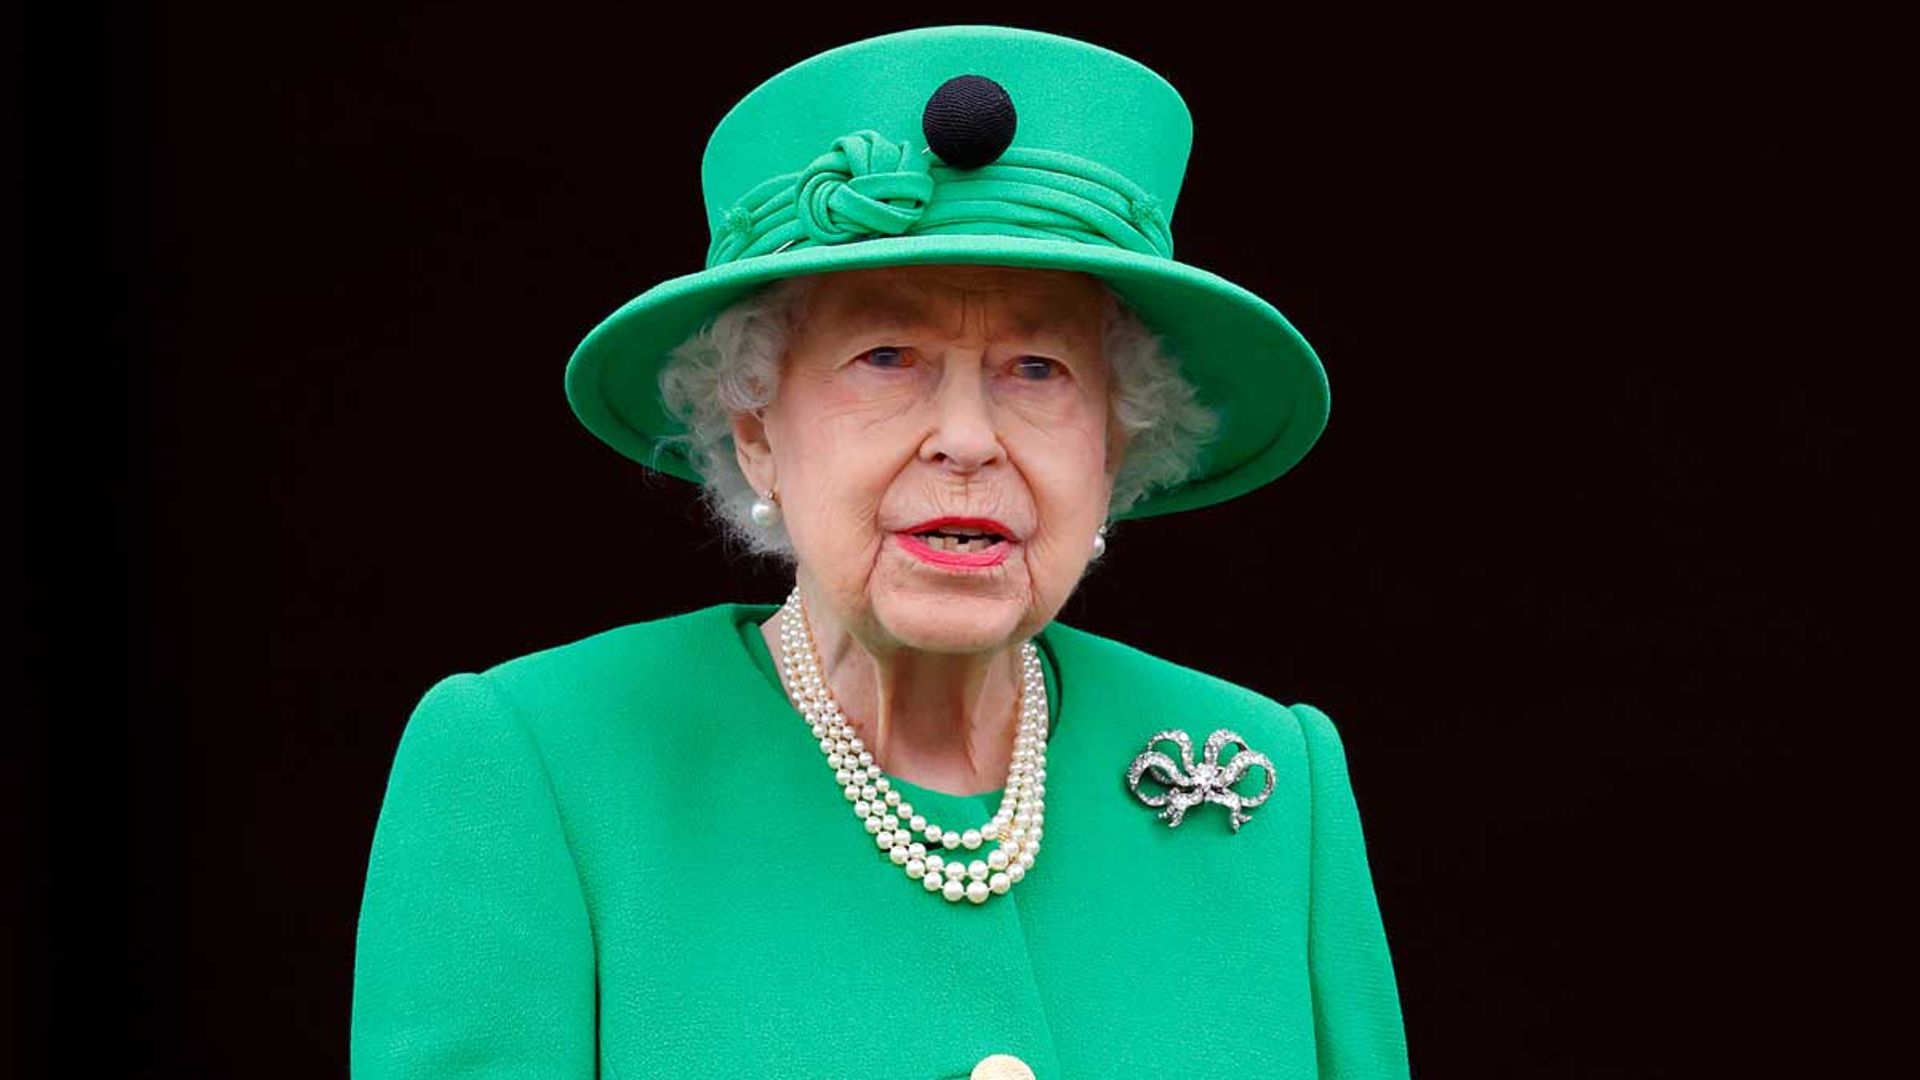 The Queen reveals changes to her reign amid ill health – all the details